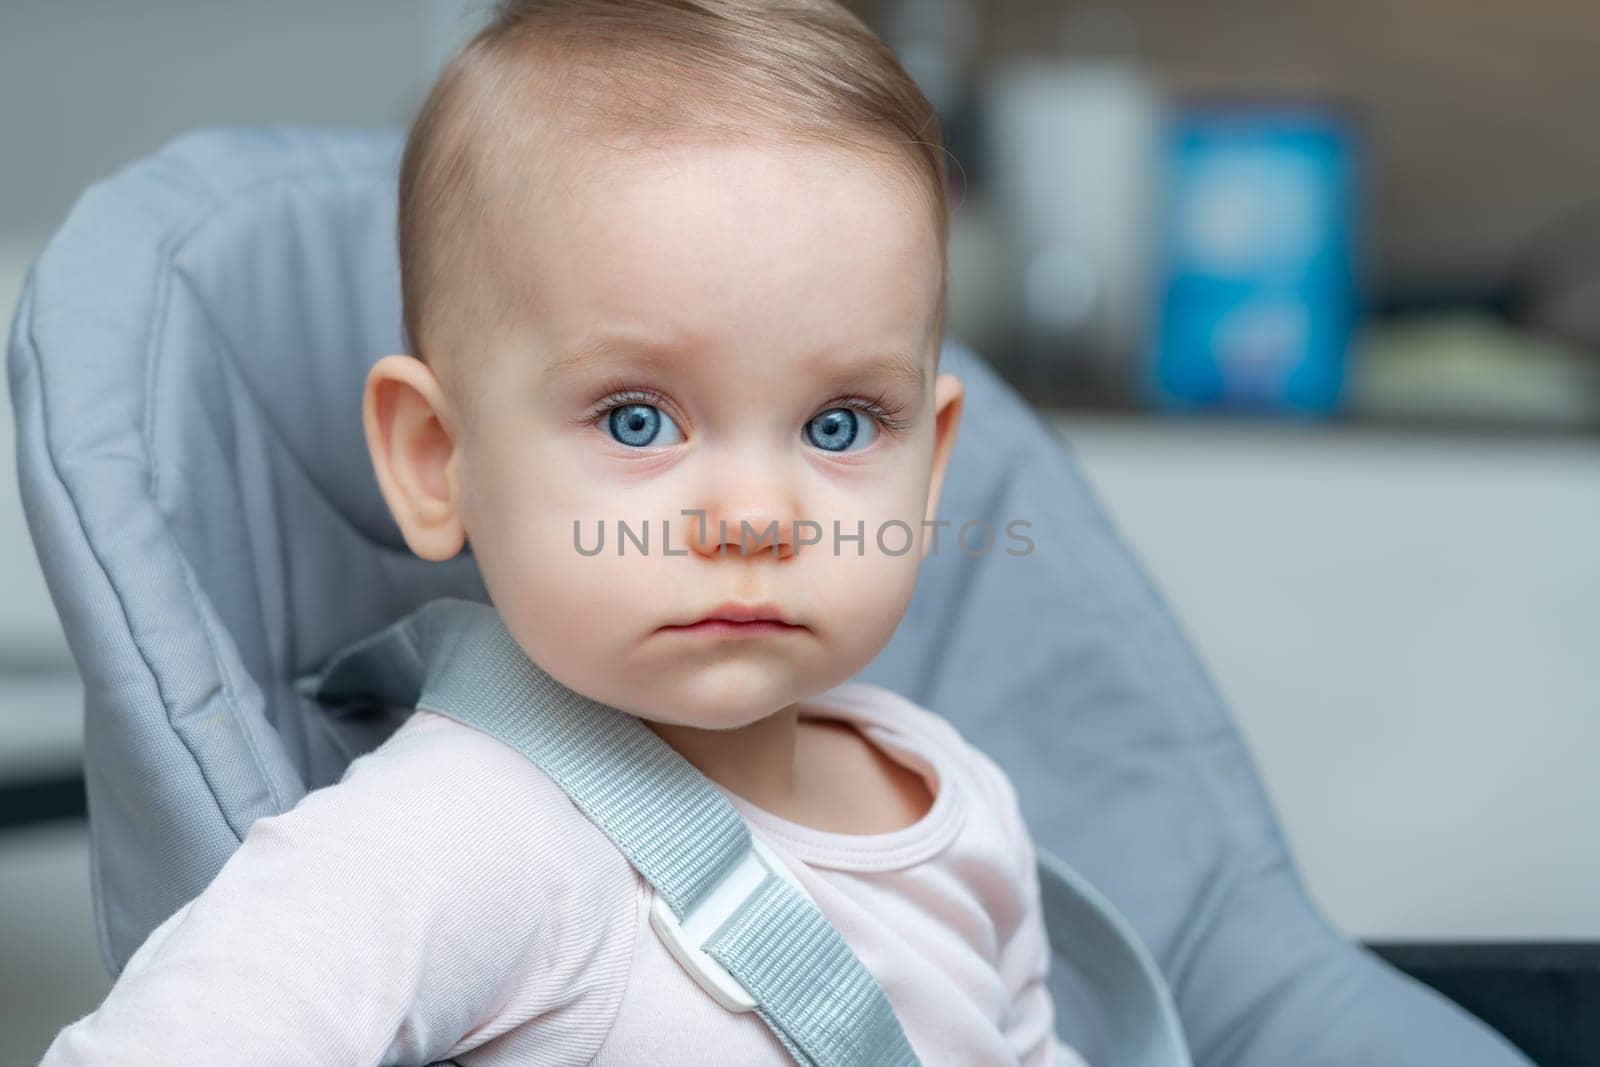 A baby in a chair gazes at the camera with curiosity by Mariakray